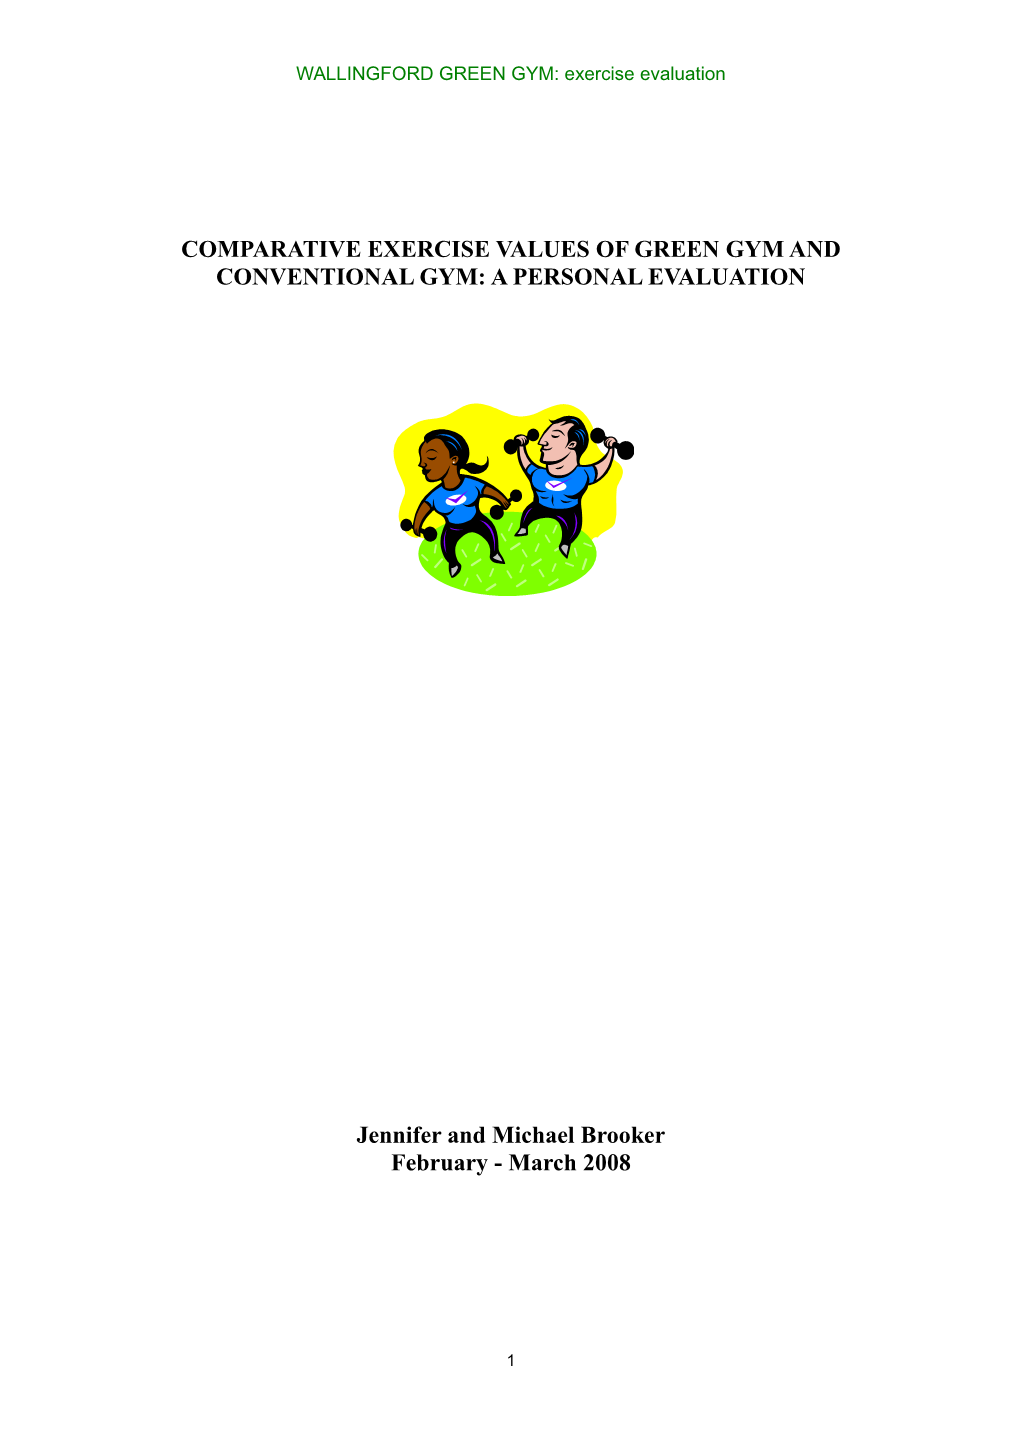 Comparative Exercise Values of Green Gym and Conventional Gym: a Personal Evaluation